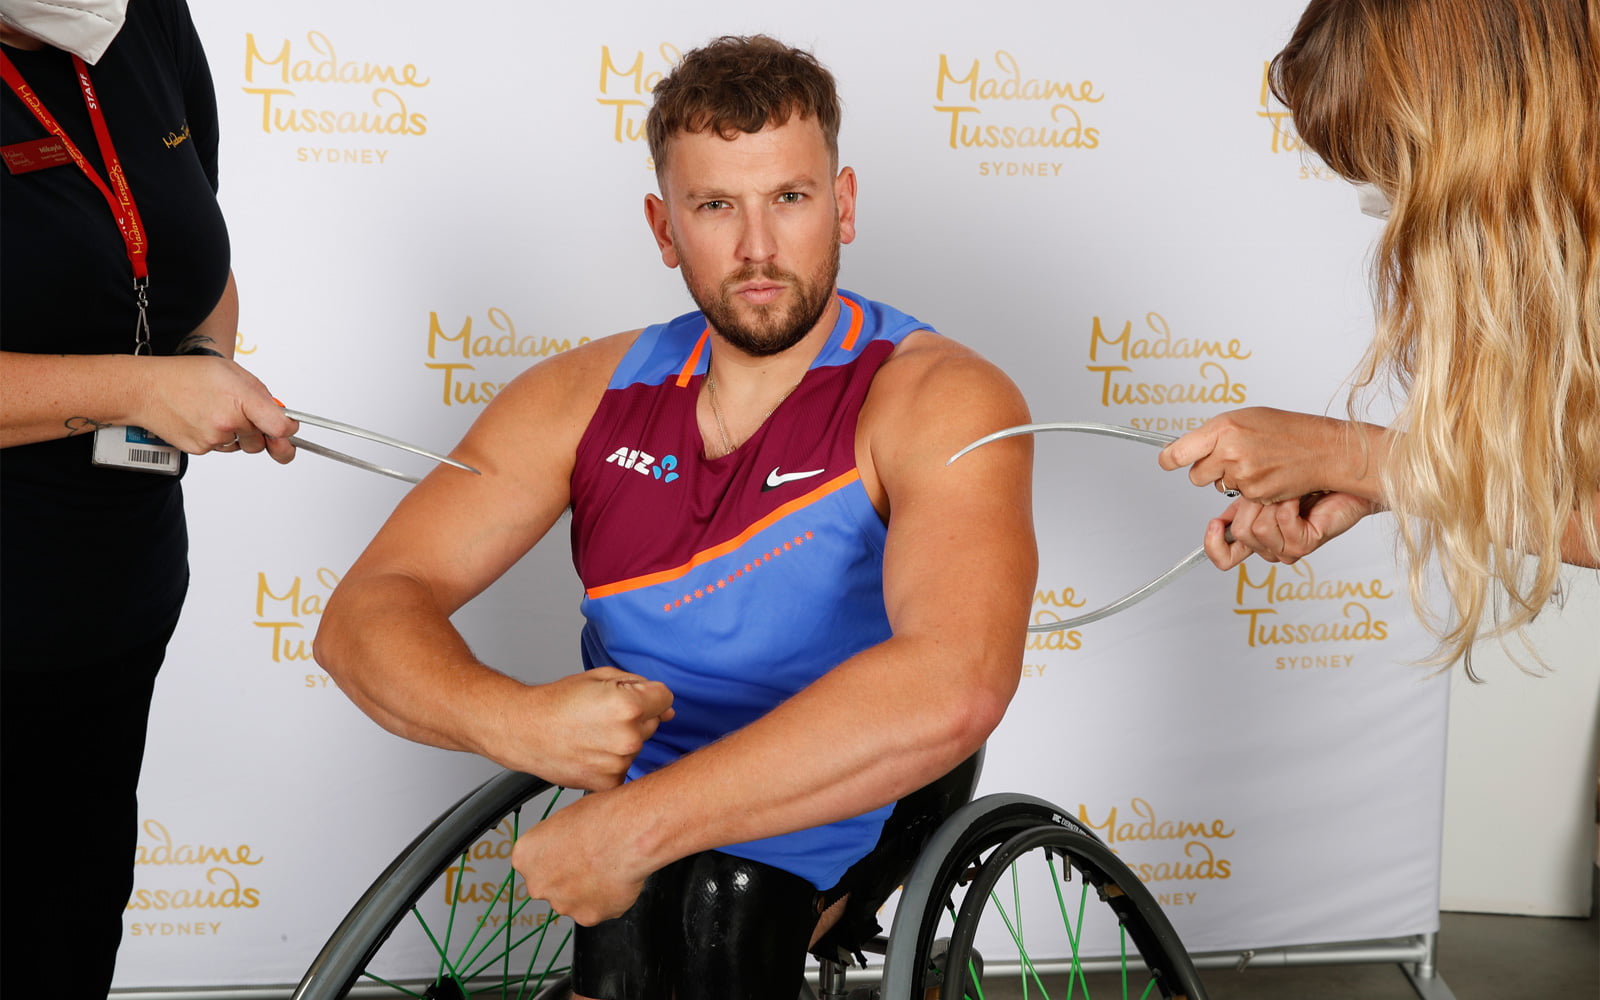 Dylan Alcott Receives Second Major Honour This Year: A Madame Tussauds Wax Figure